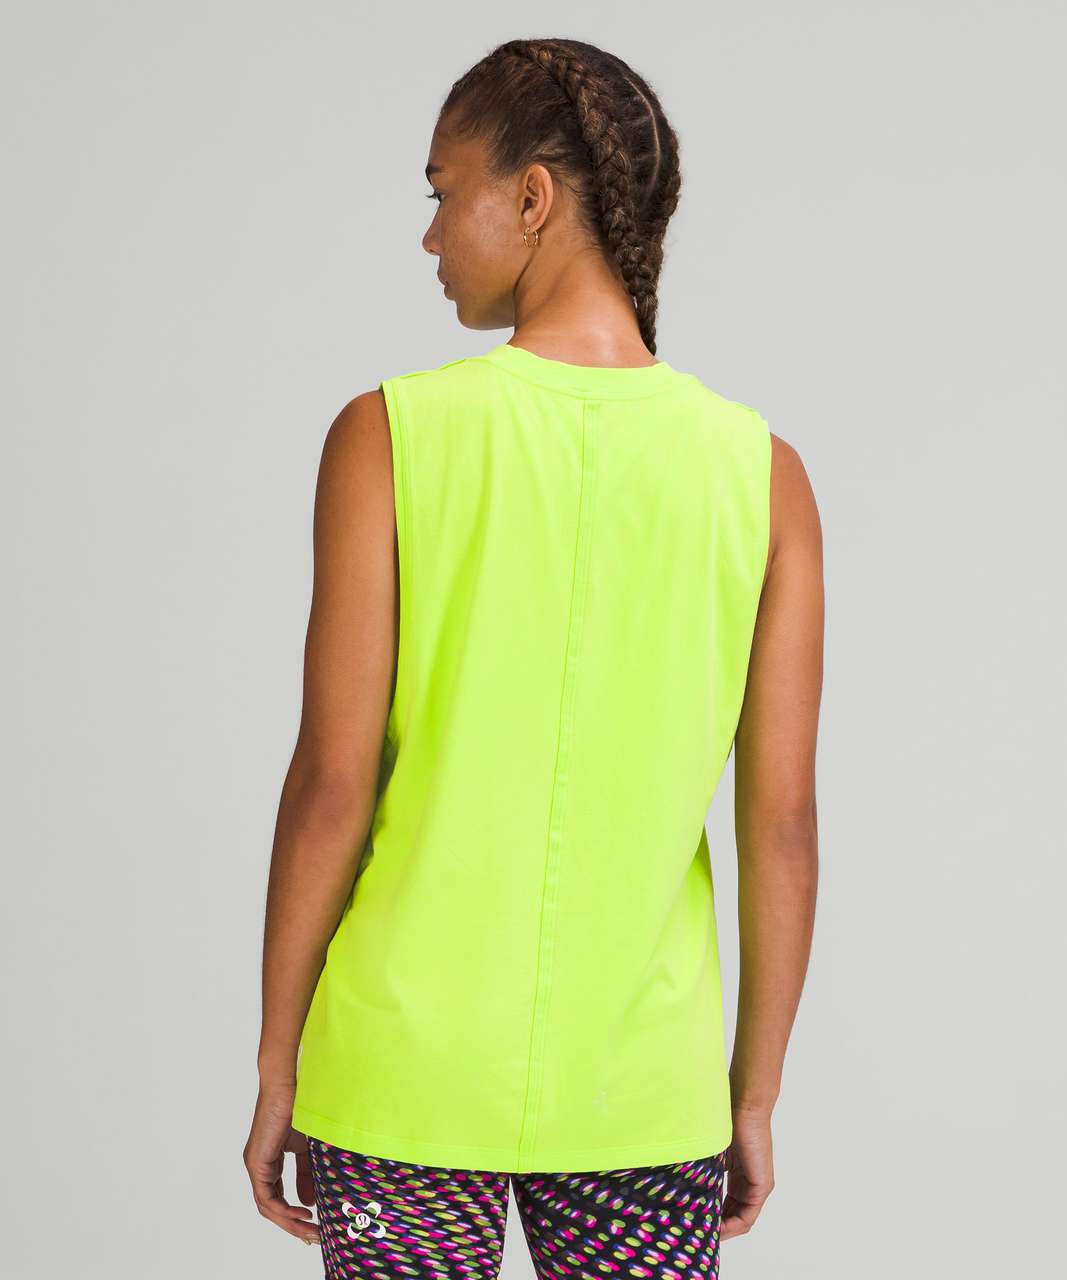 Lululemon SeaWheeze All Yours Tank Top - Absinthe